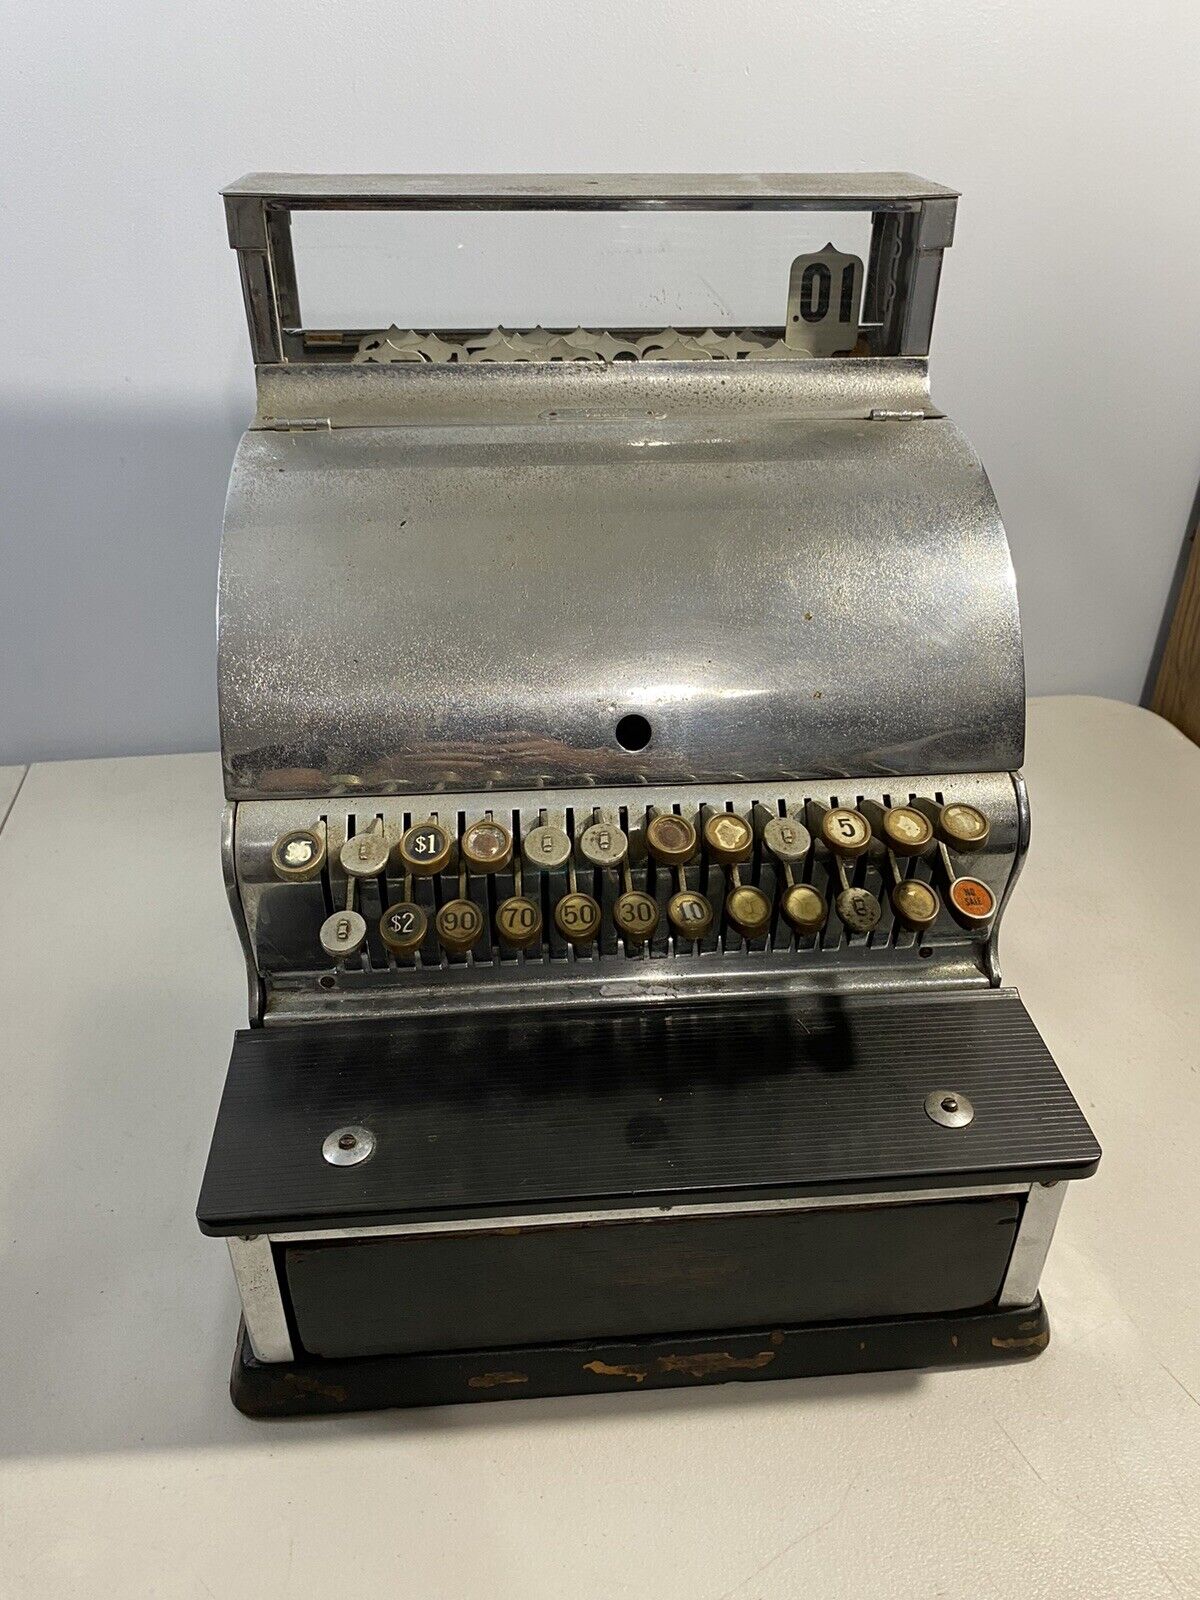 Antique 1900s Cash Register Used At Swan’s Thrift Store